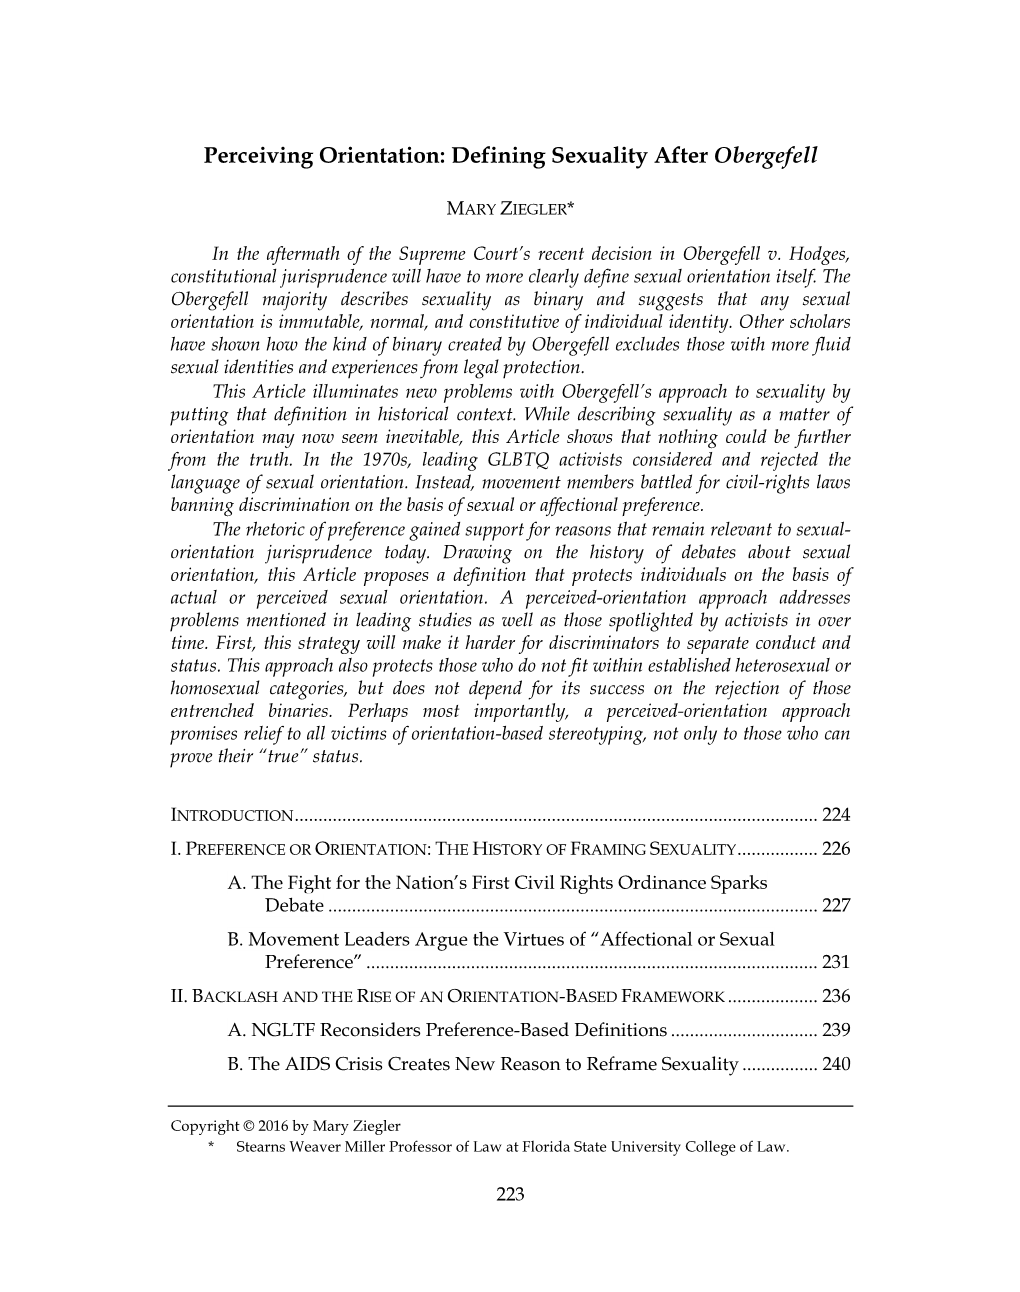 Perceiving Orientation: Defining Sexuality After Obergefell